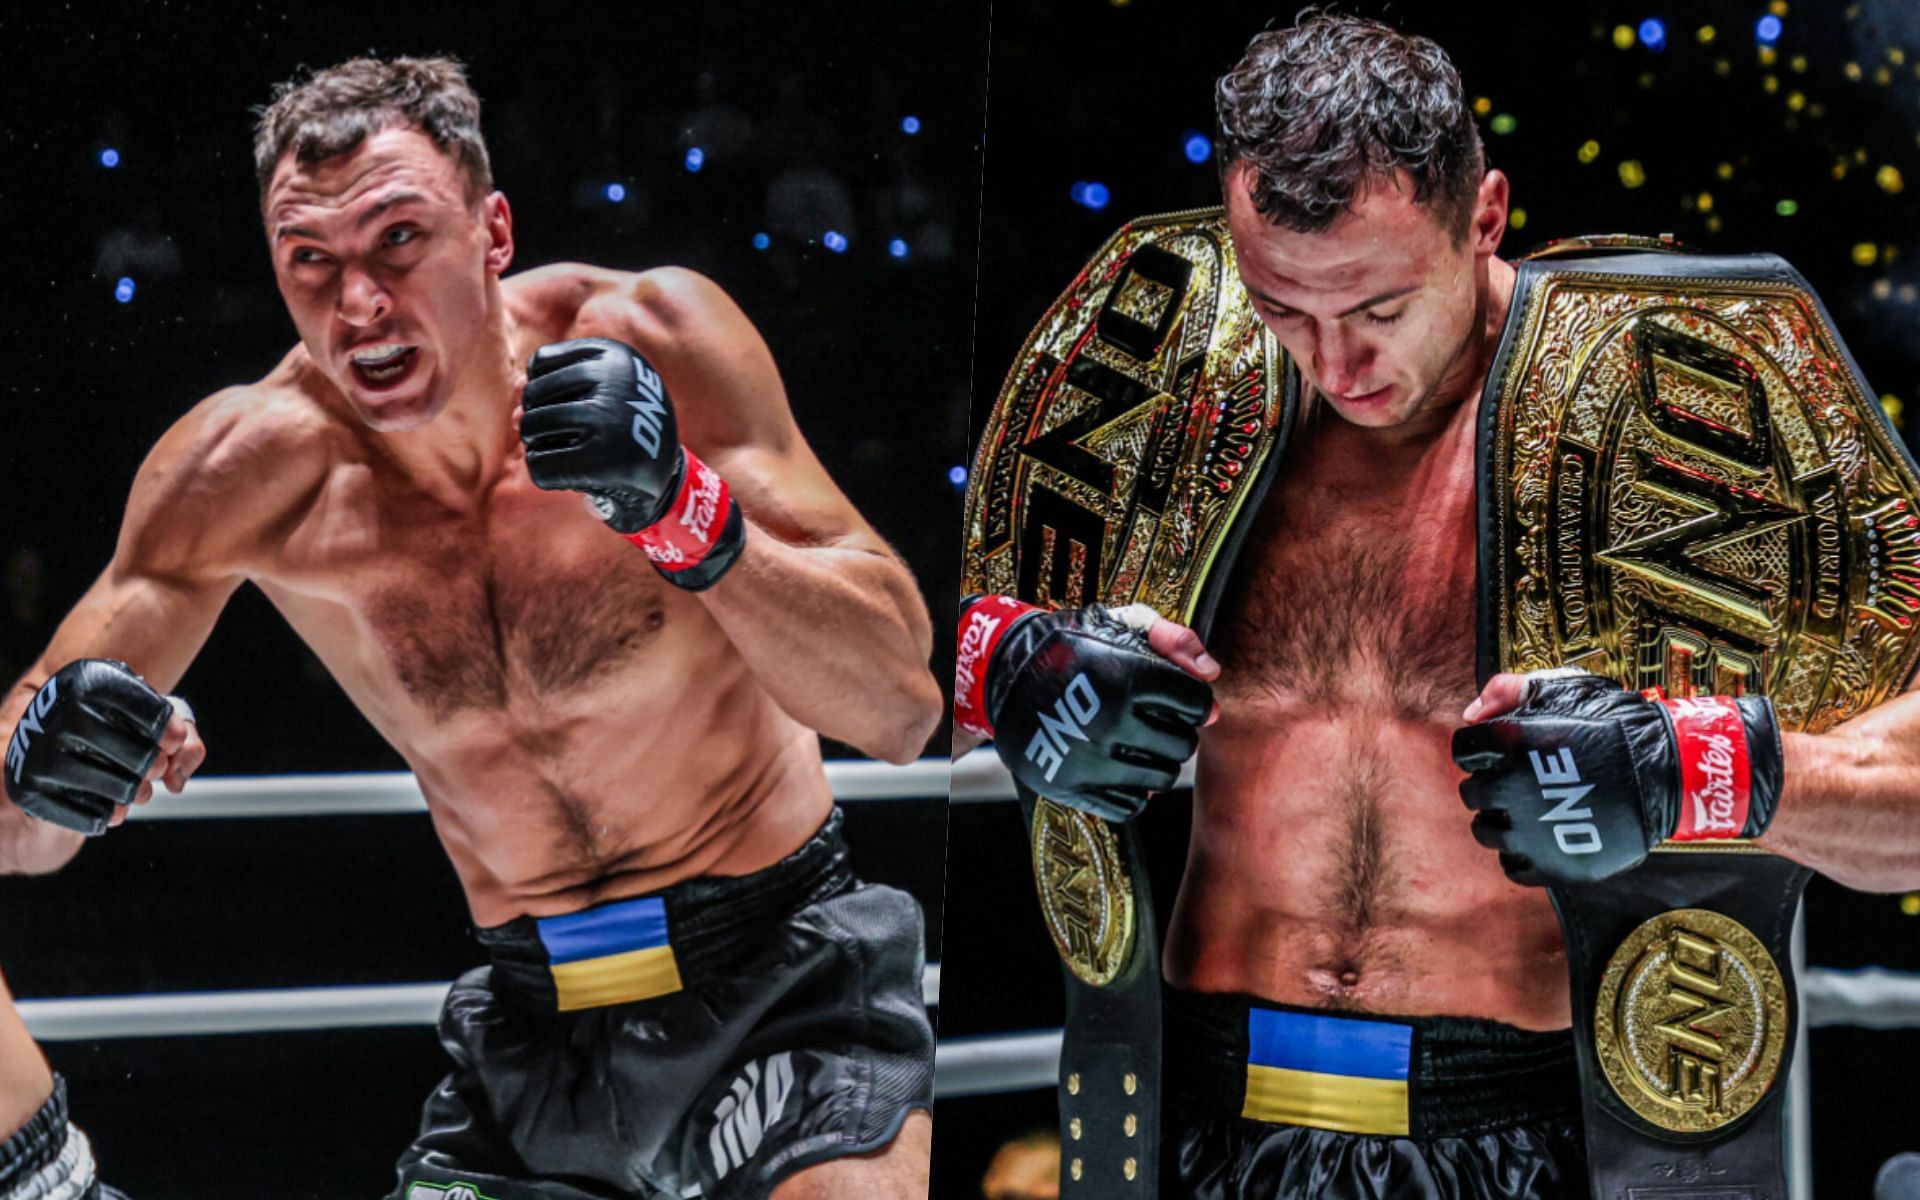 Double ONE world champion Roman Kryklia believes Muay Thai also suits his skill set. -- Photo by ONE Championship